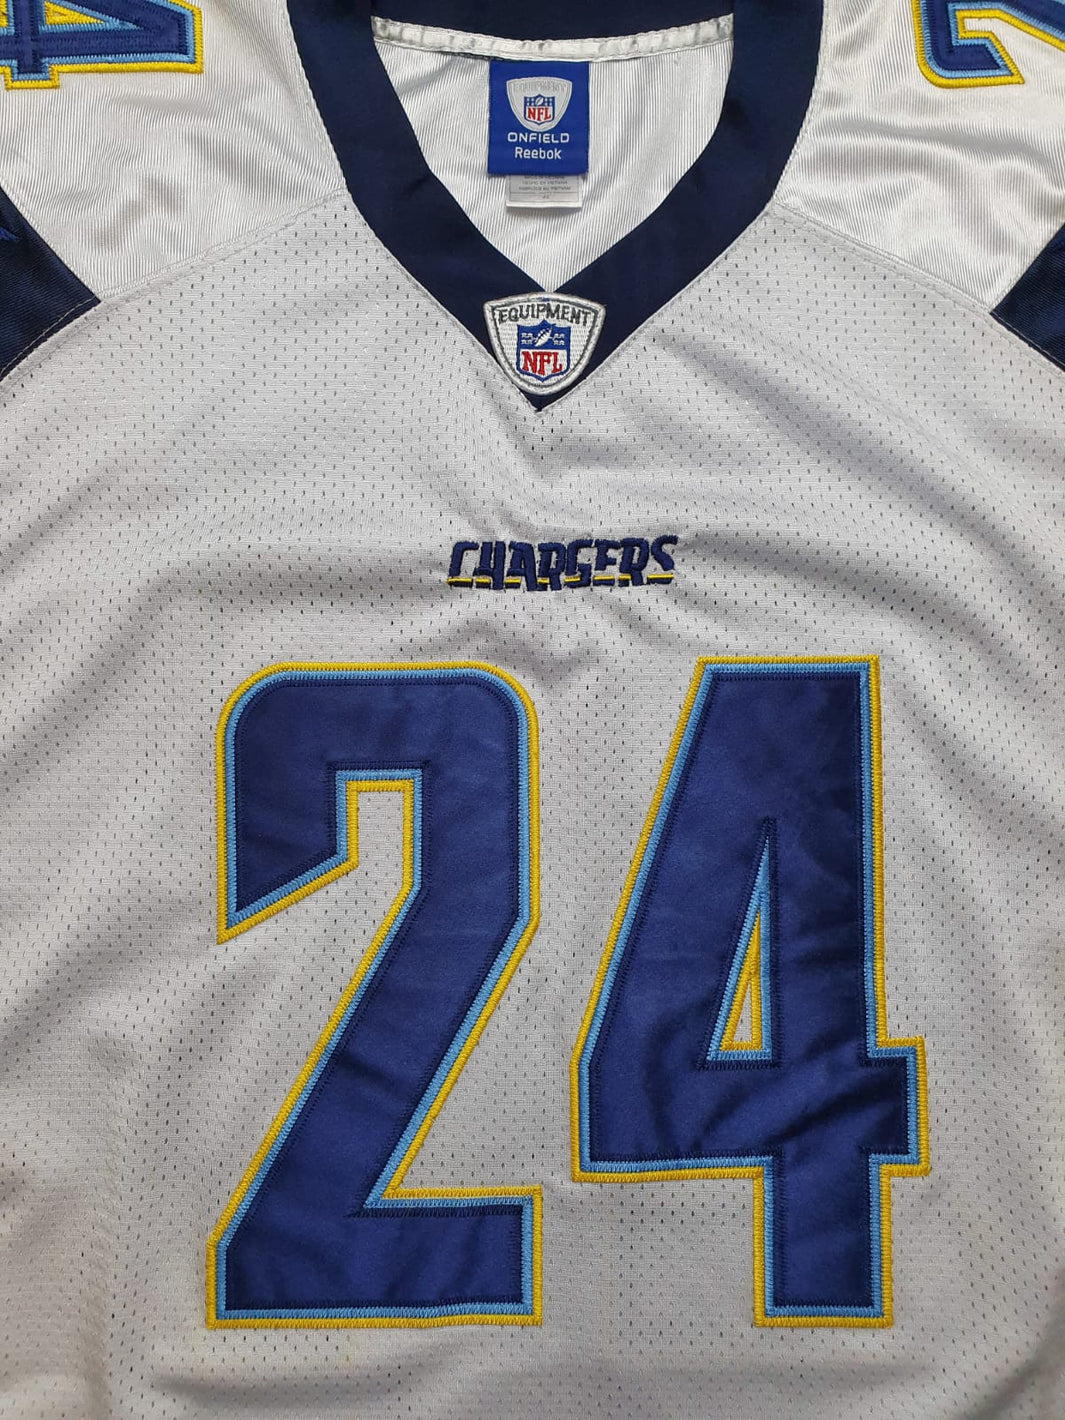 NFL Chargers Jersey on field No.24 Mathews